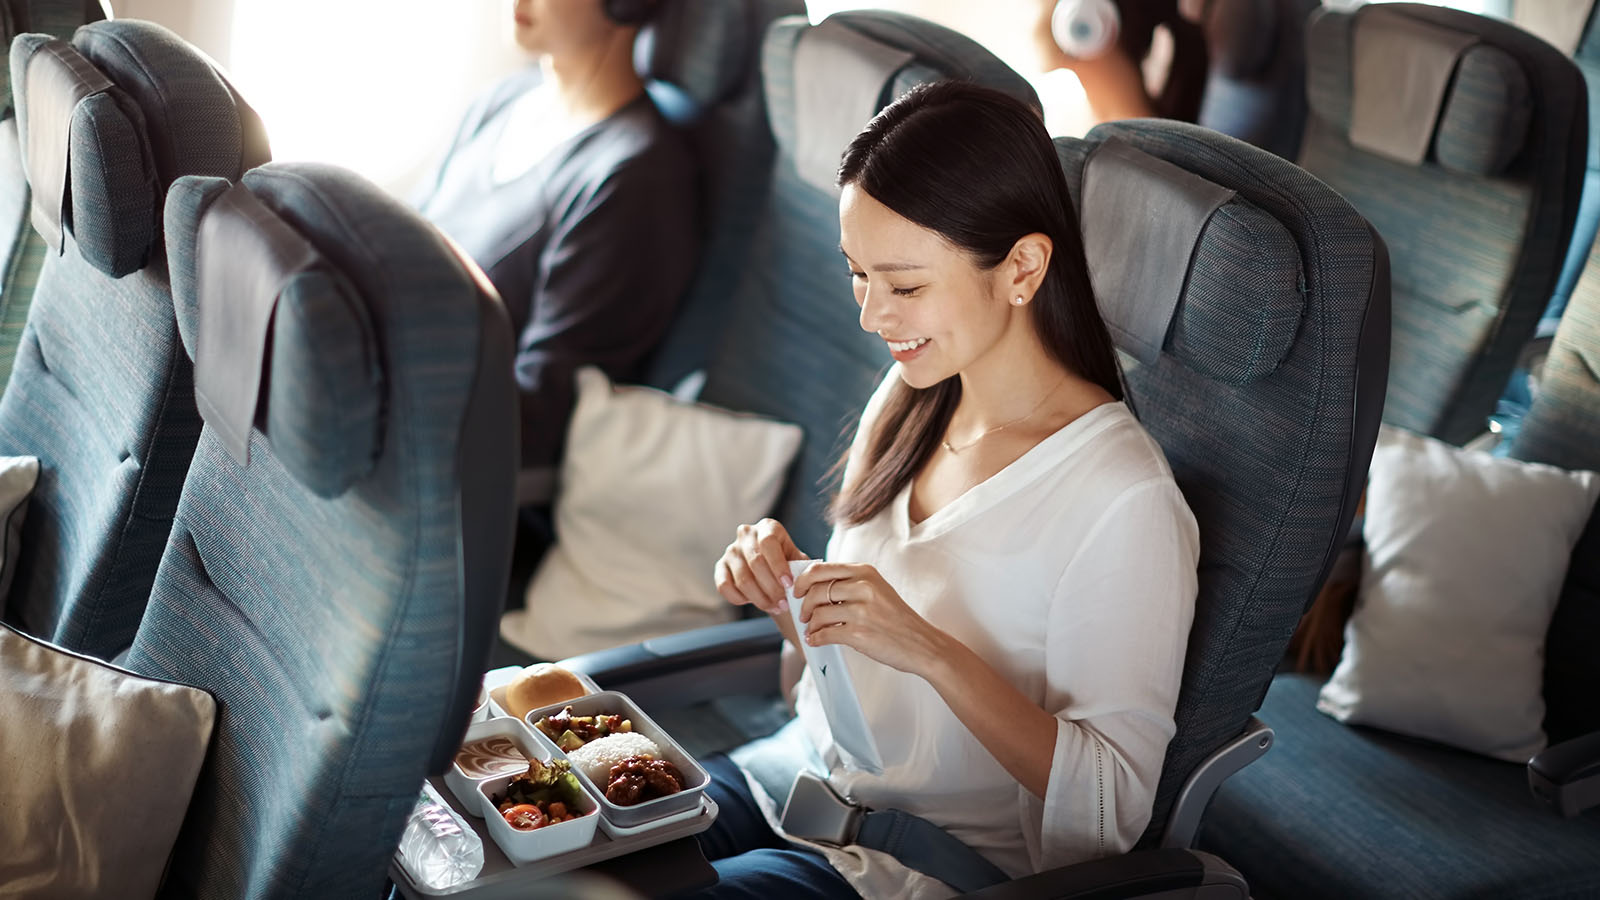 Cathay Pacific Airbus A350 Economy Class